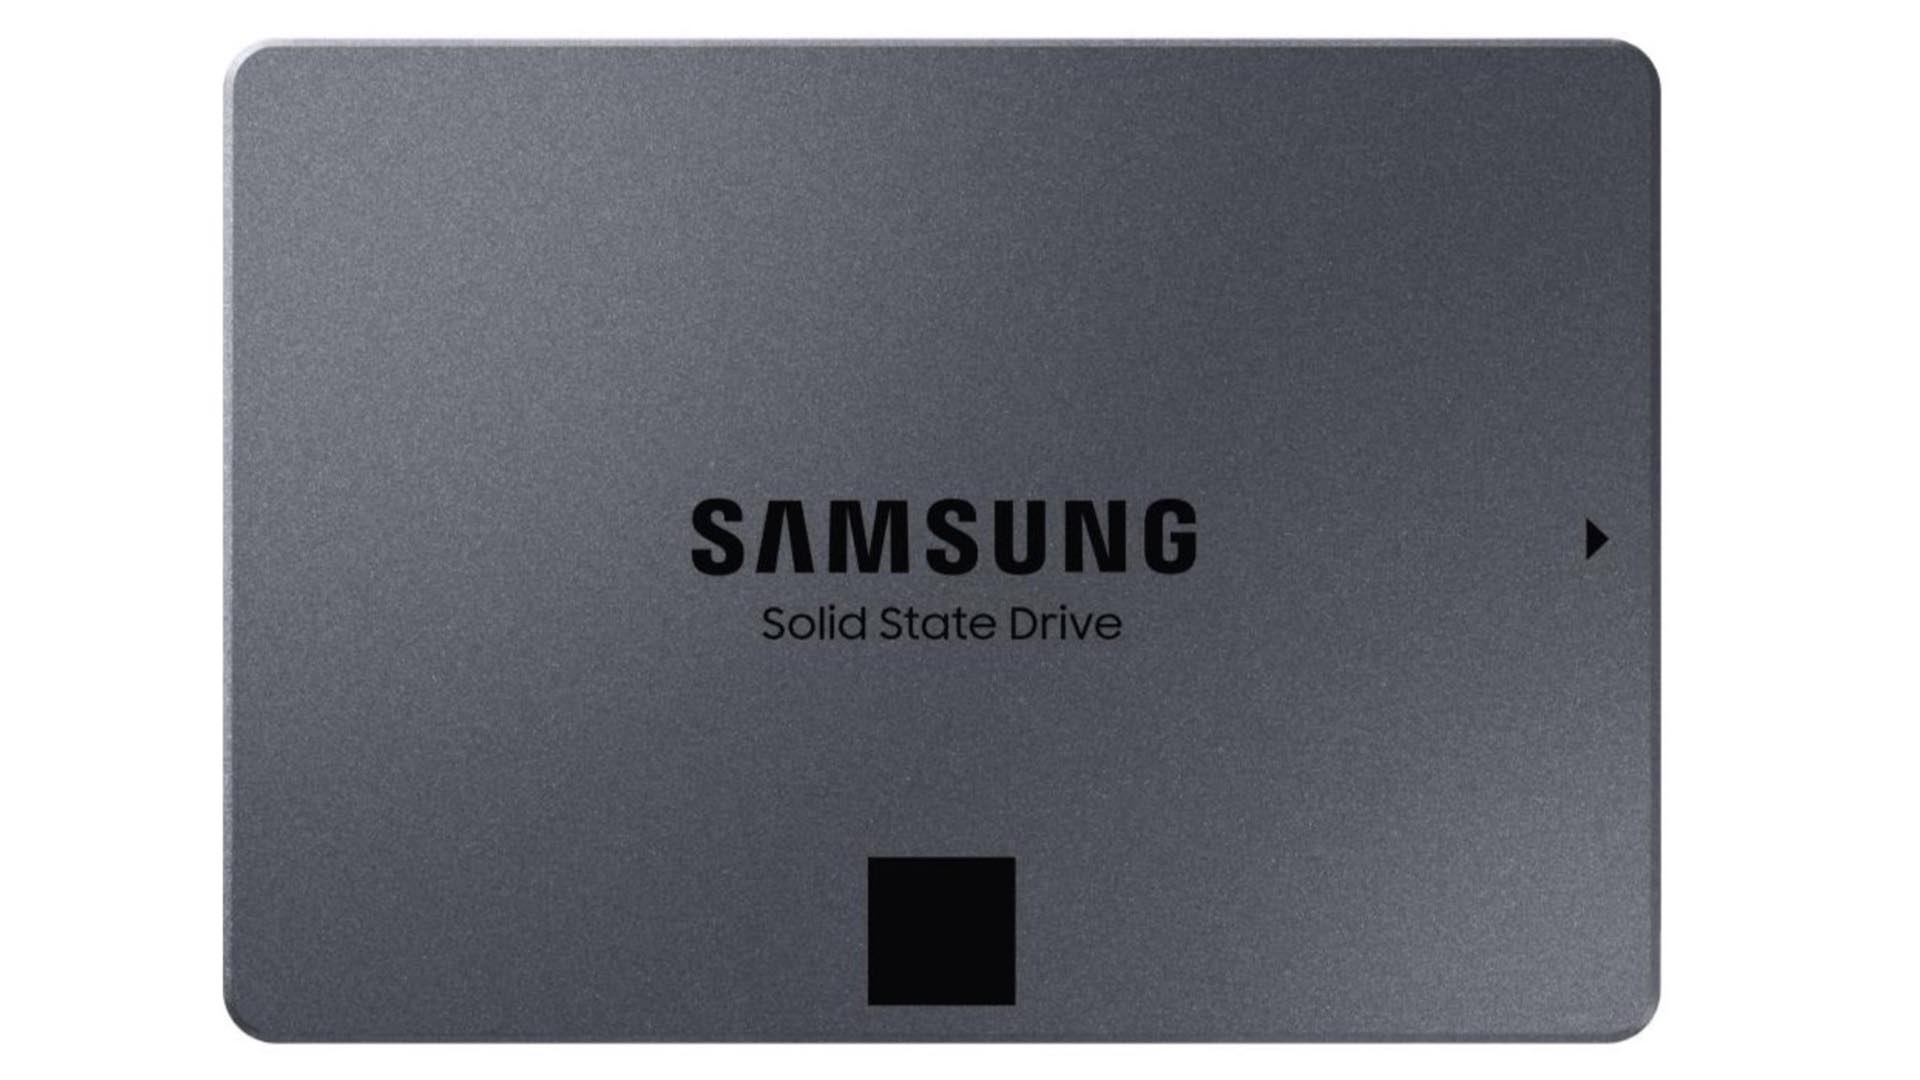 Samsung’s 1TB SATA SSD is up to 25% cheaper today